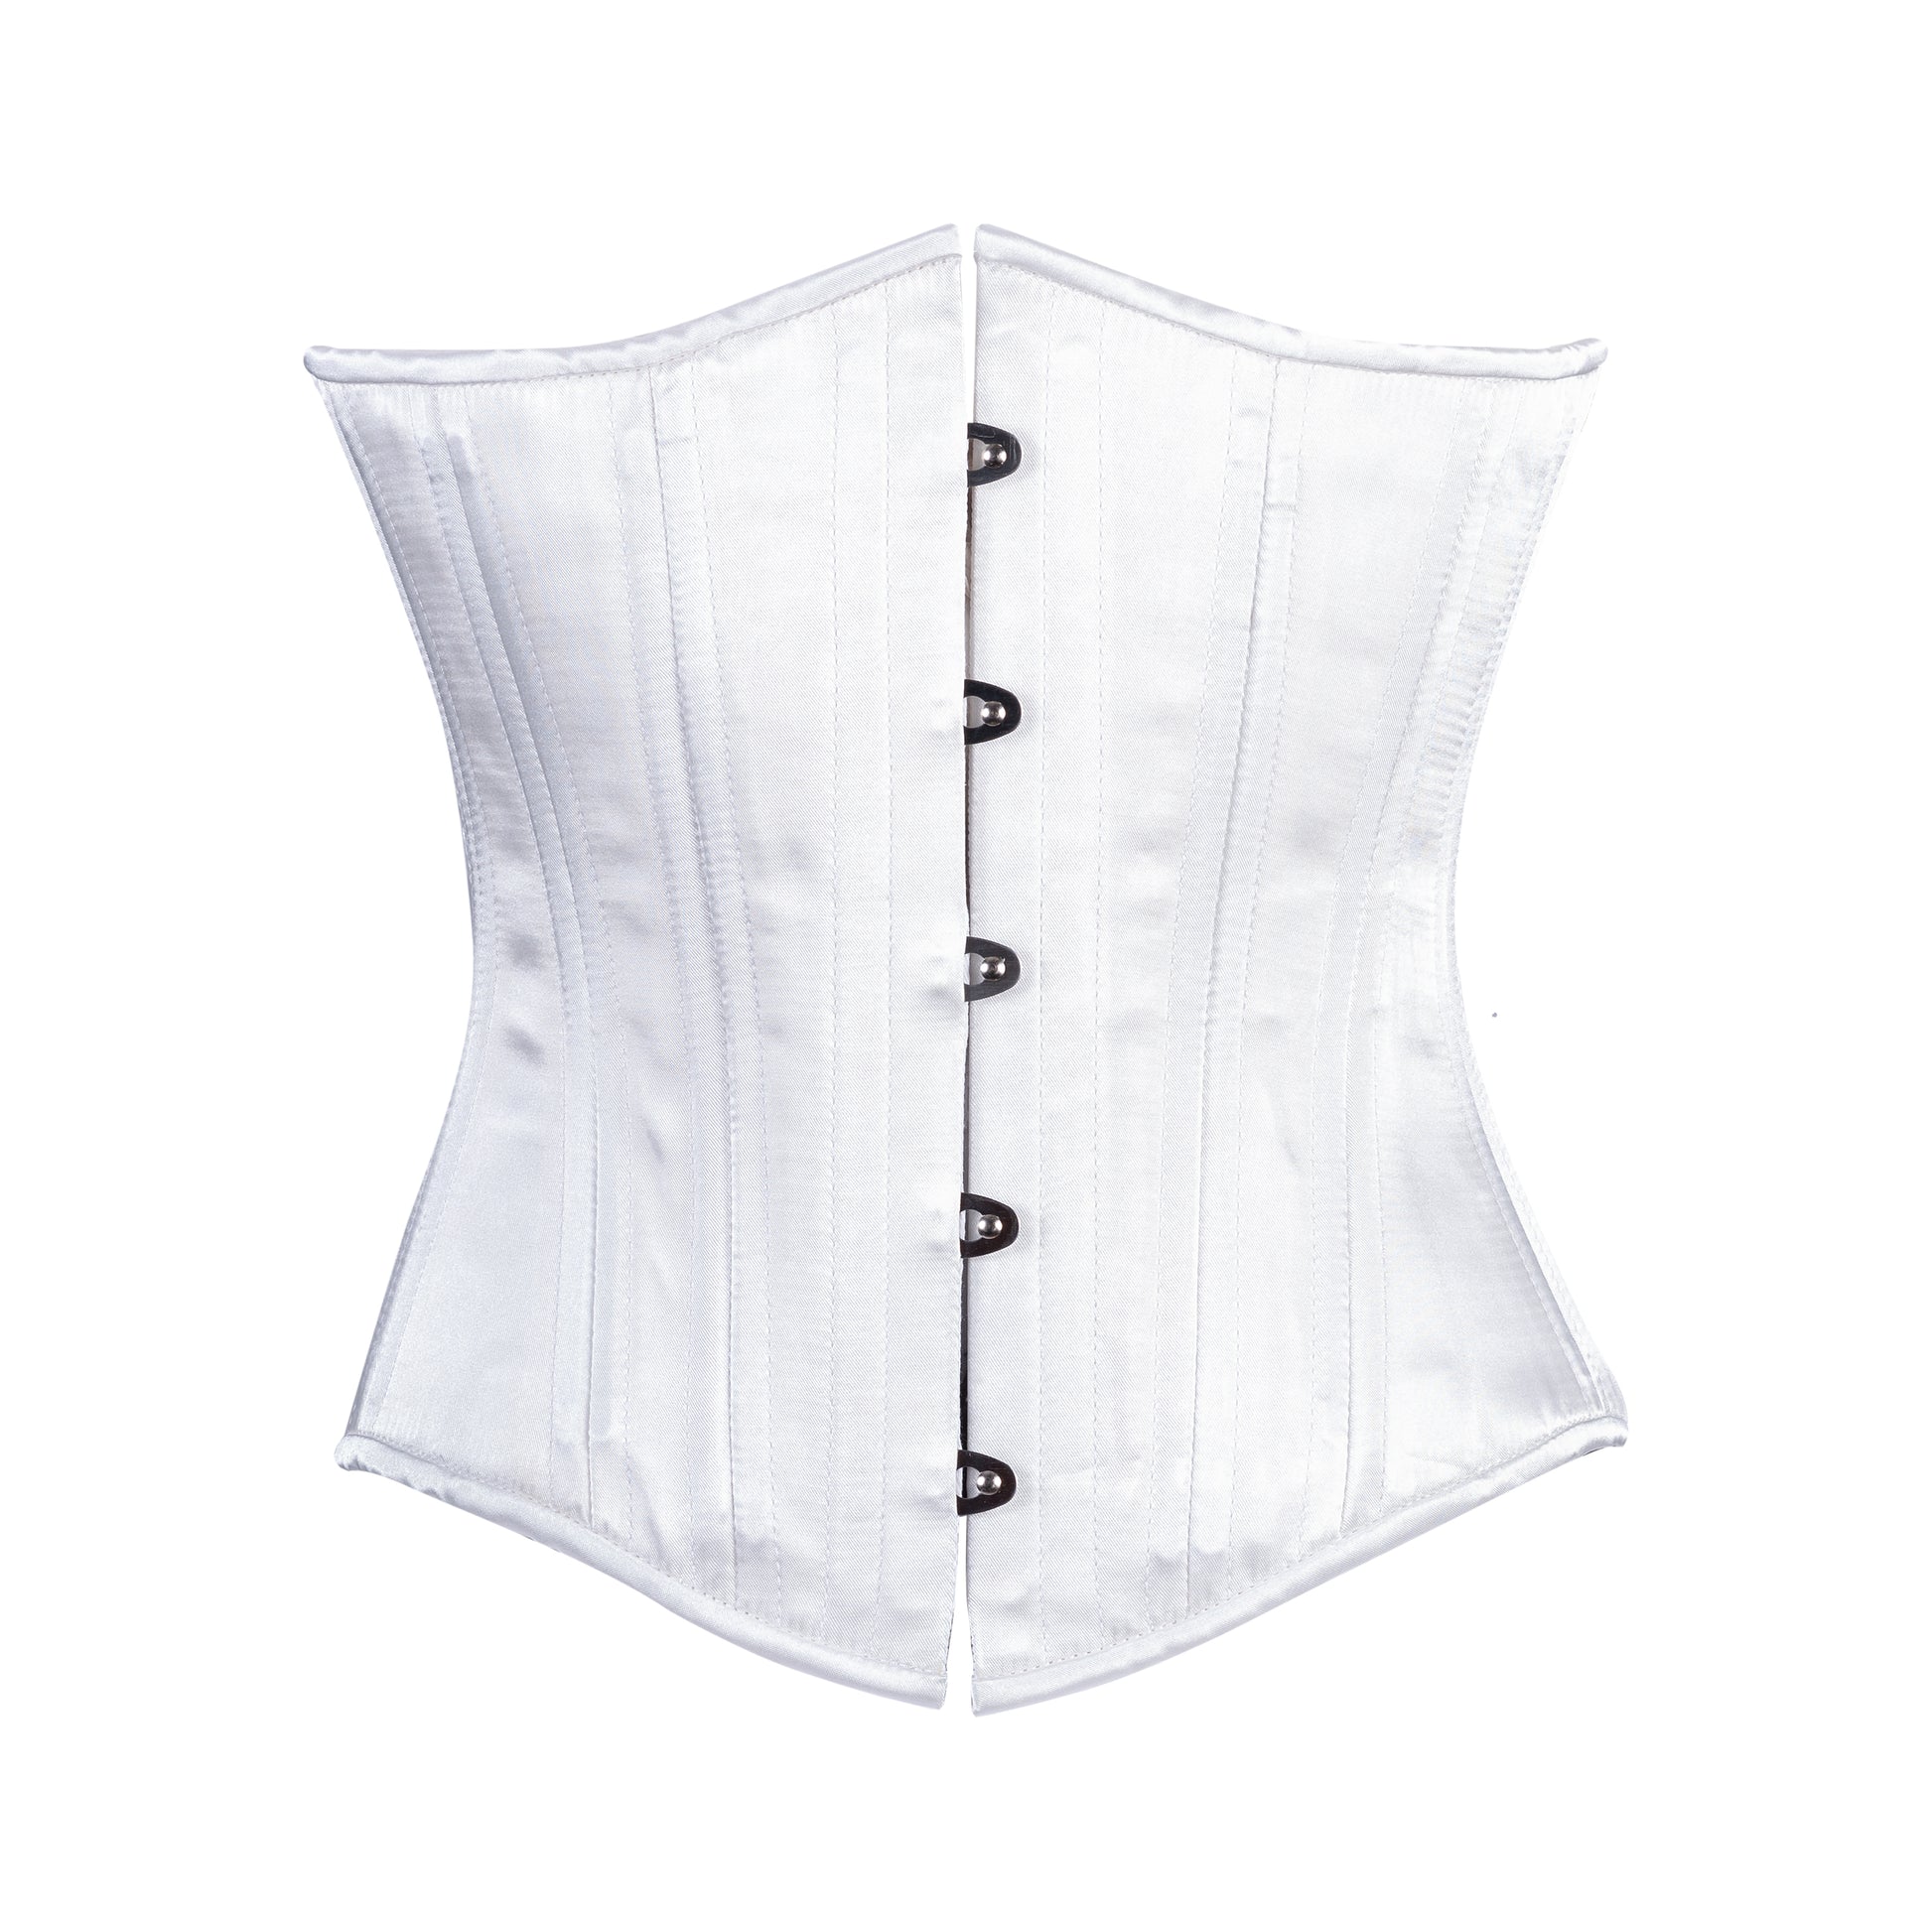 Black Corset With Satin Cups Steel Boned Transparent Over Bust Tightlacing  Corset Wedding Corset Waist Training Bridal White Corset Lace Top -   Ireland